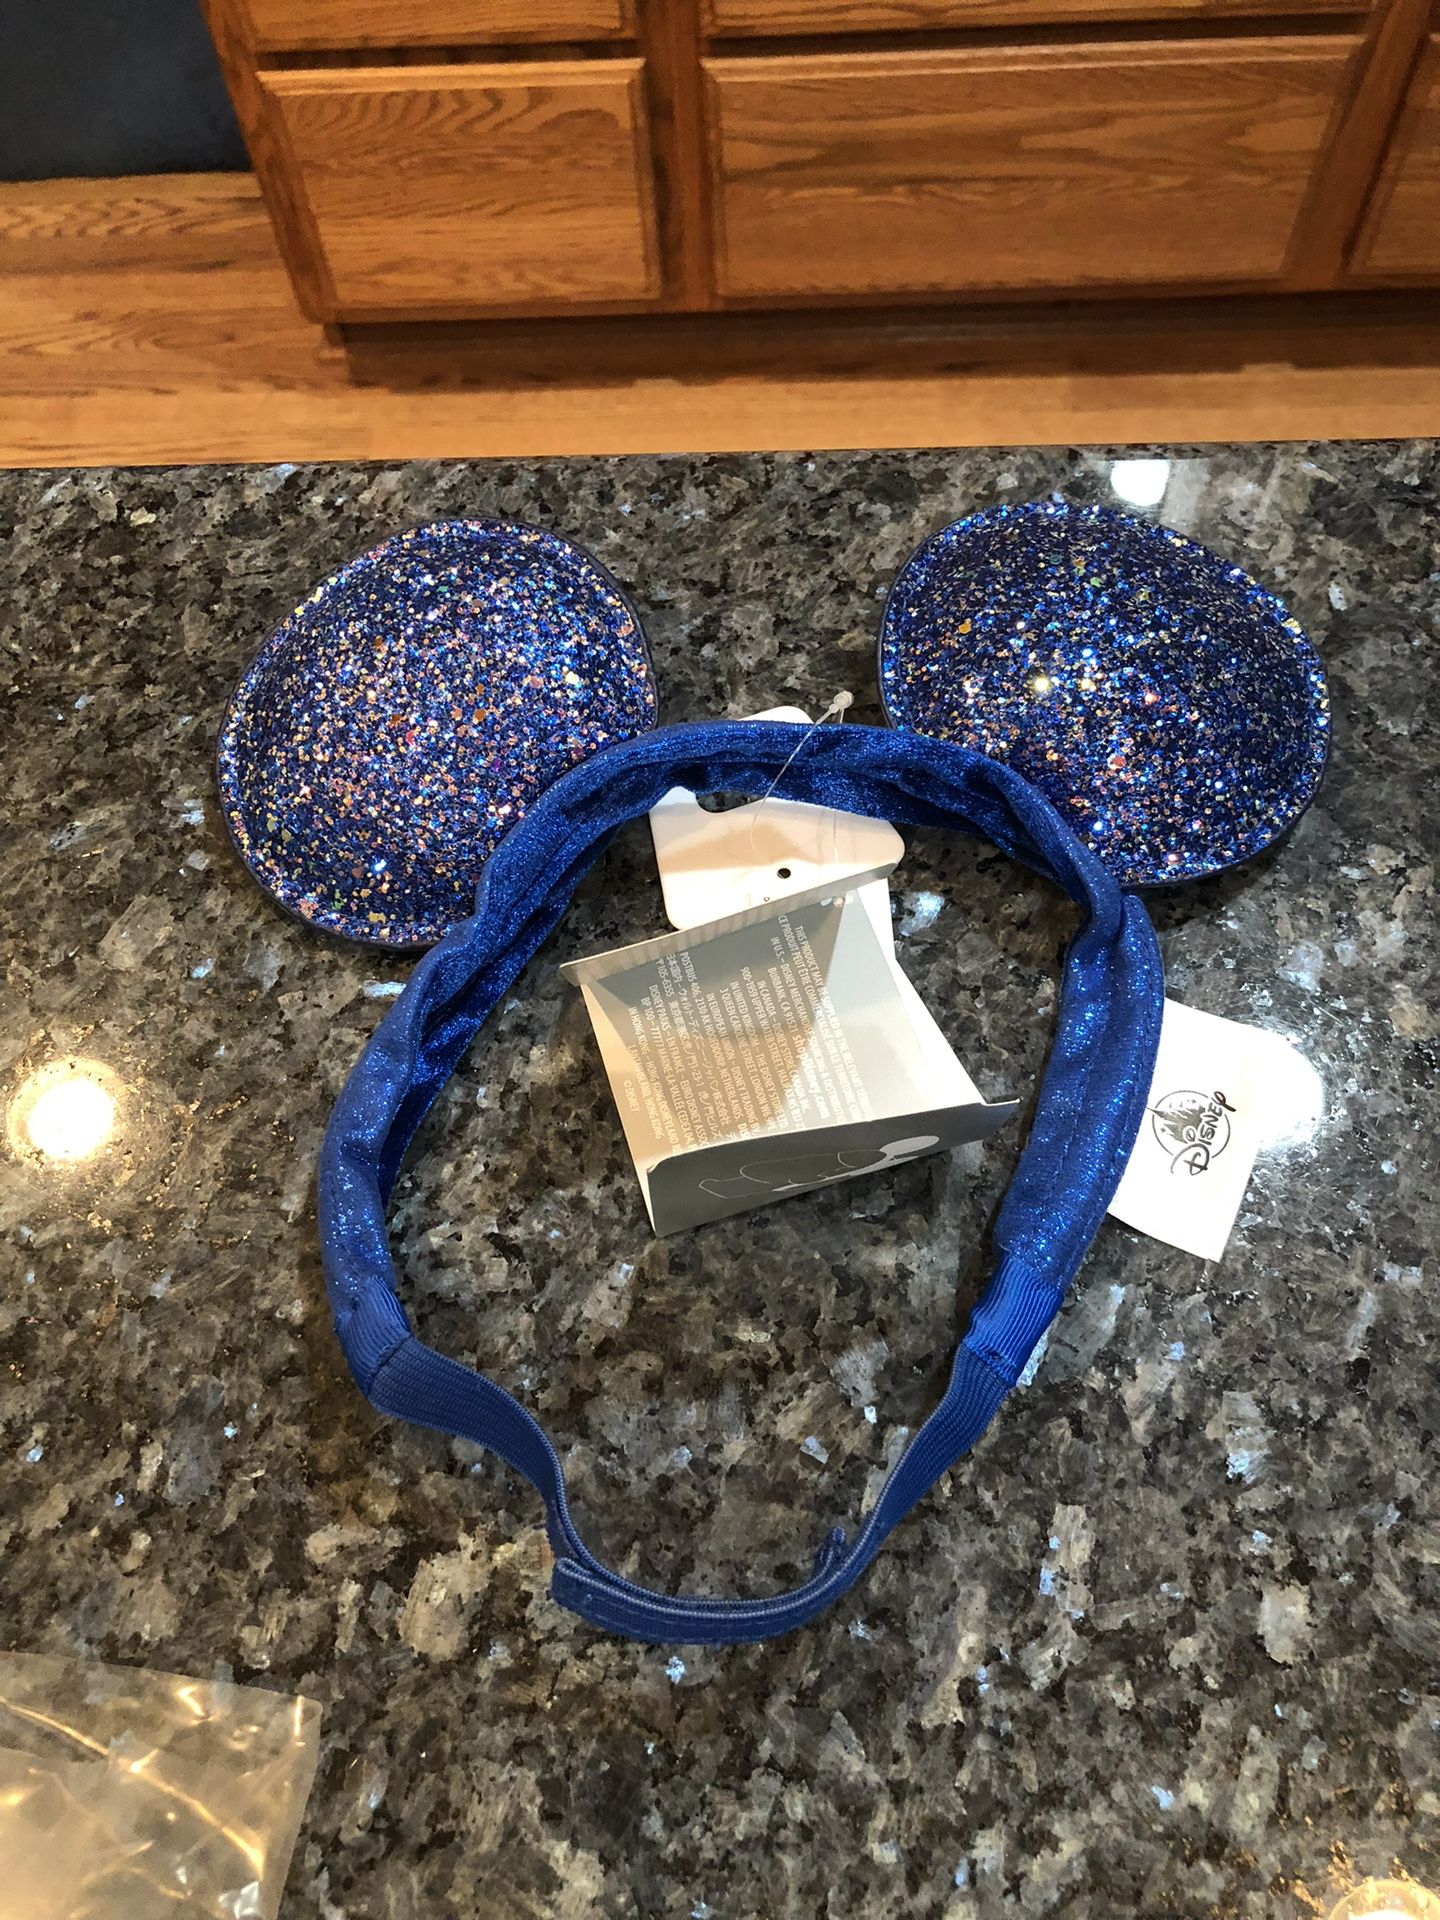 Disney Youth Mickey Mouse Ears Shiny Blue Adaptable Fit Headband With Velcro Adjustment .  Brand New Never Used With Tags Lot 